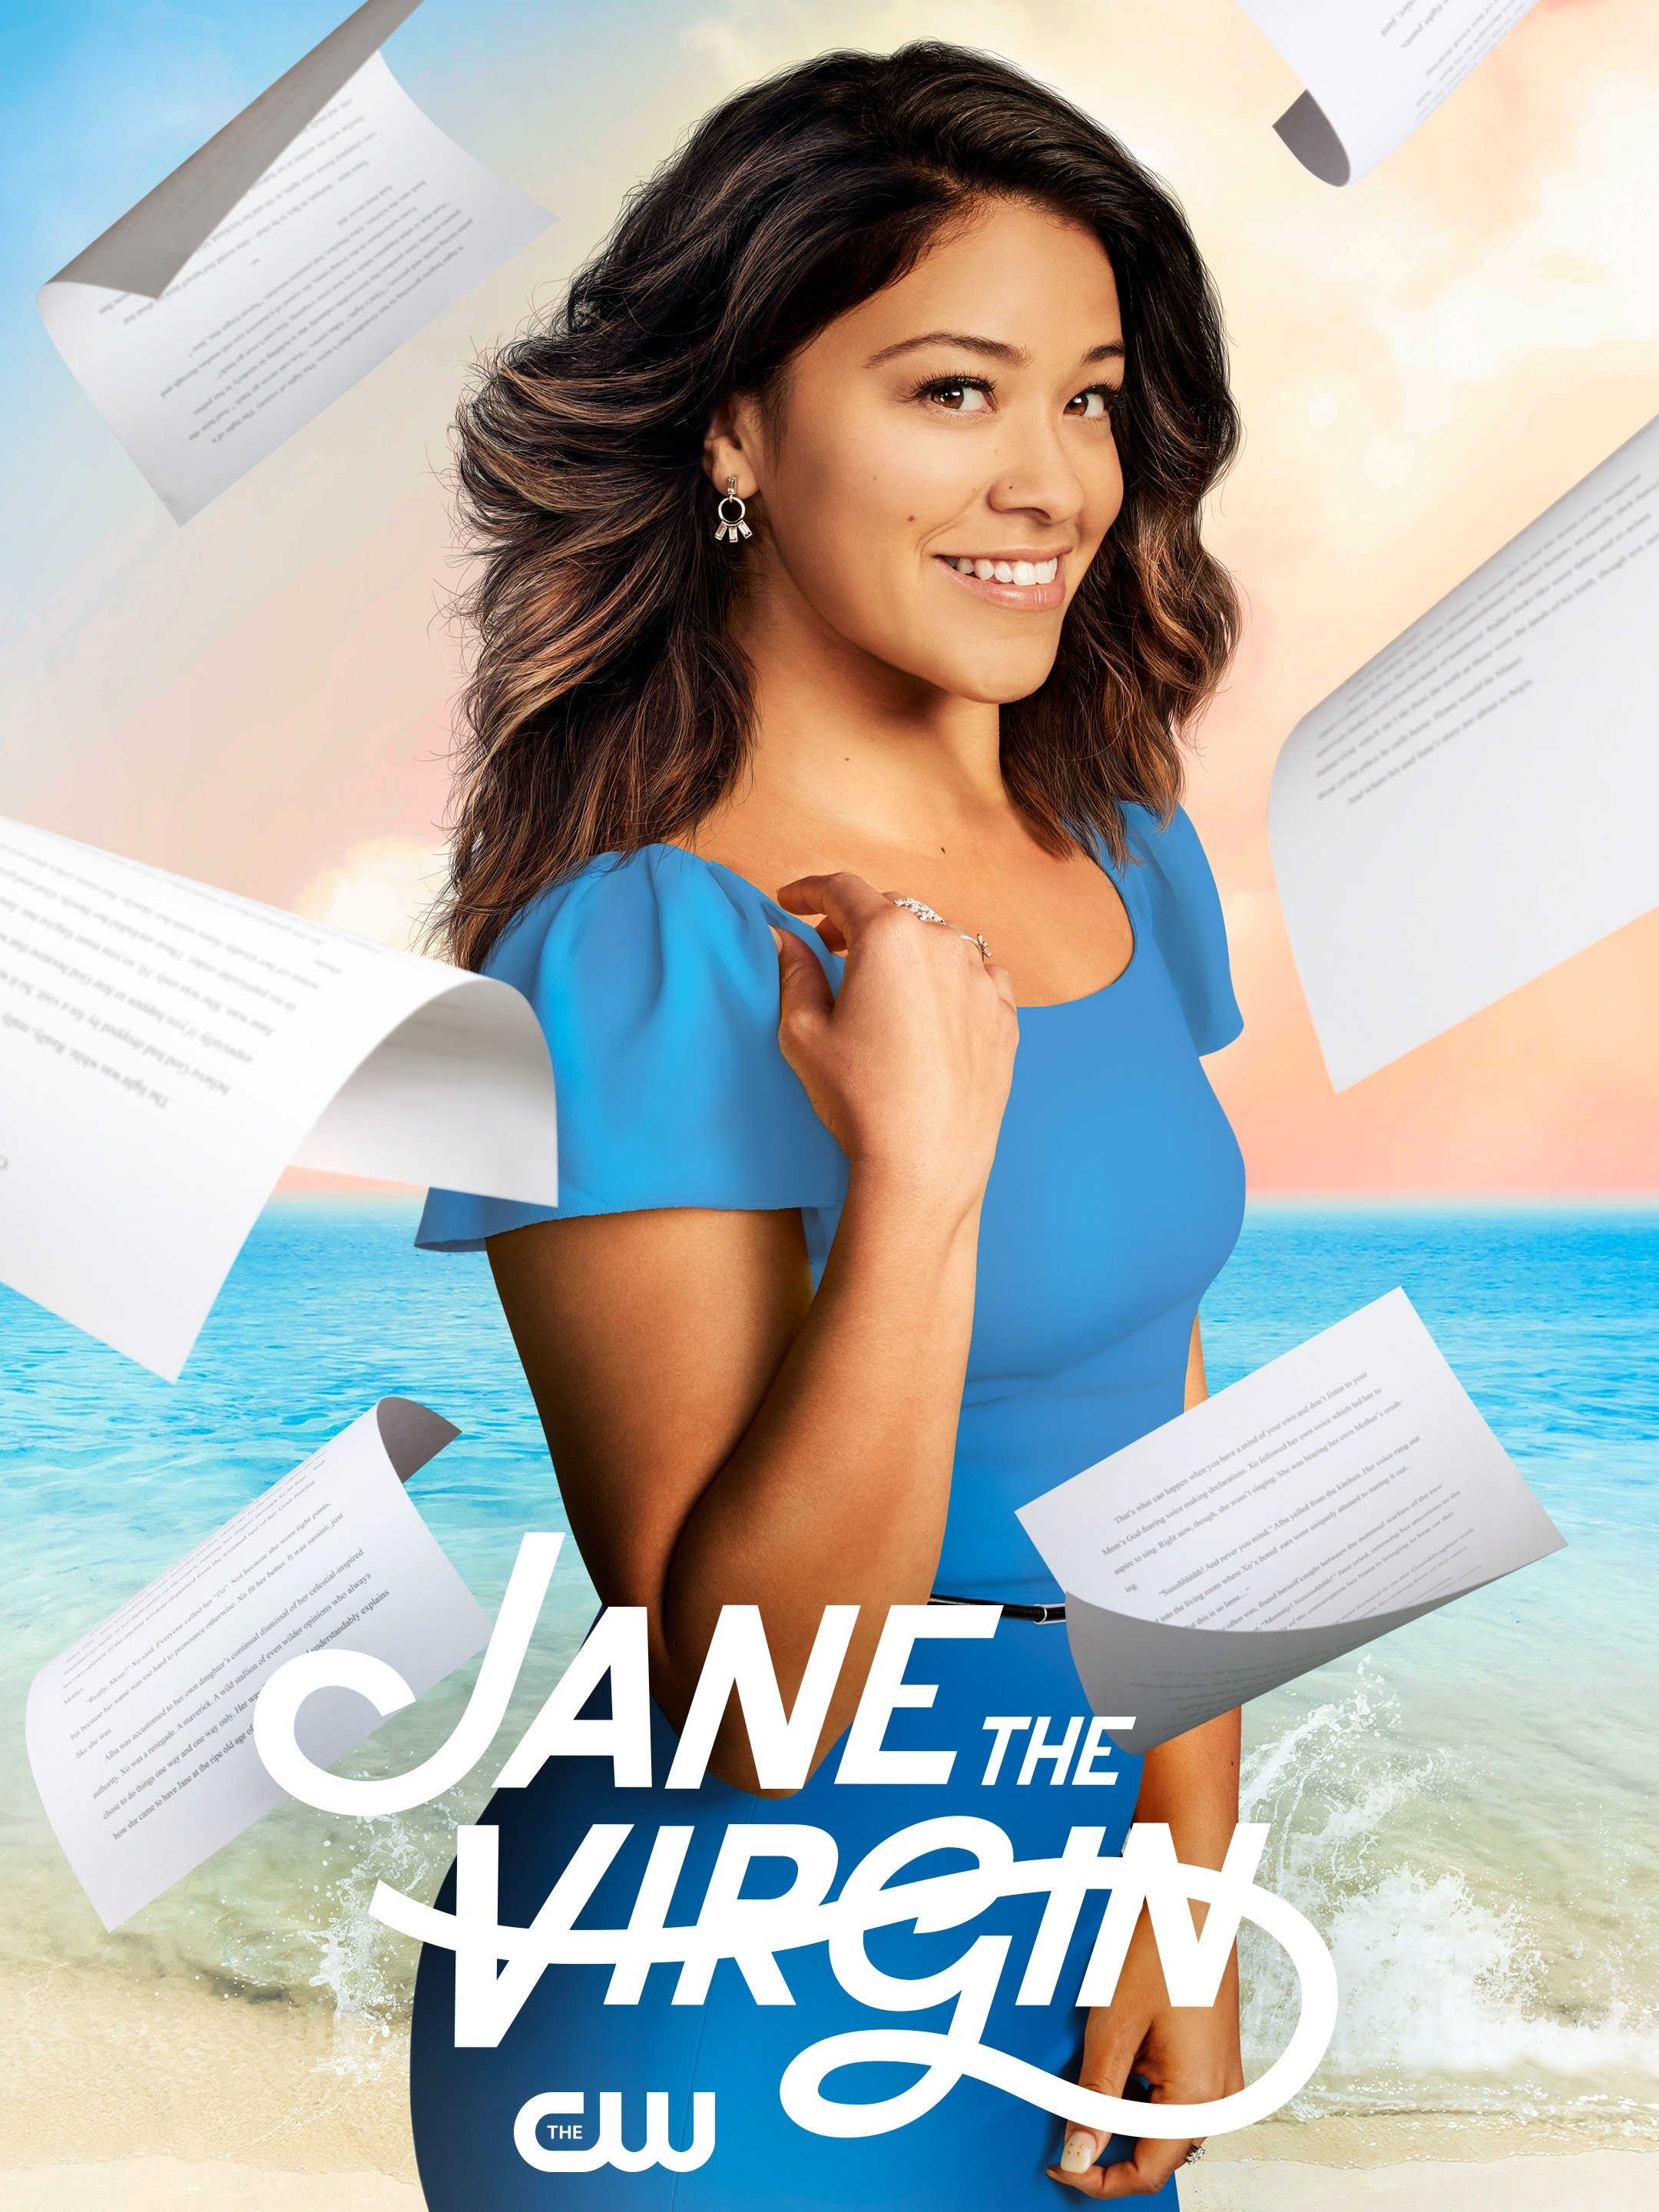 Gina Rodriguez: The protagonist of “Jane the Virgin”, American comedy-drama television series. 2160x2880 HD Wallpaper.